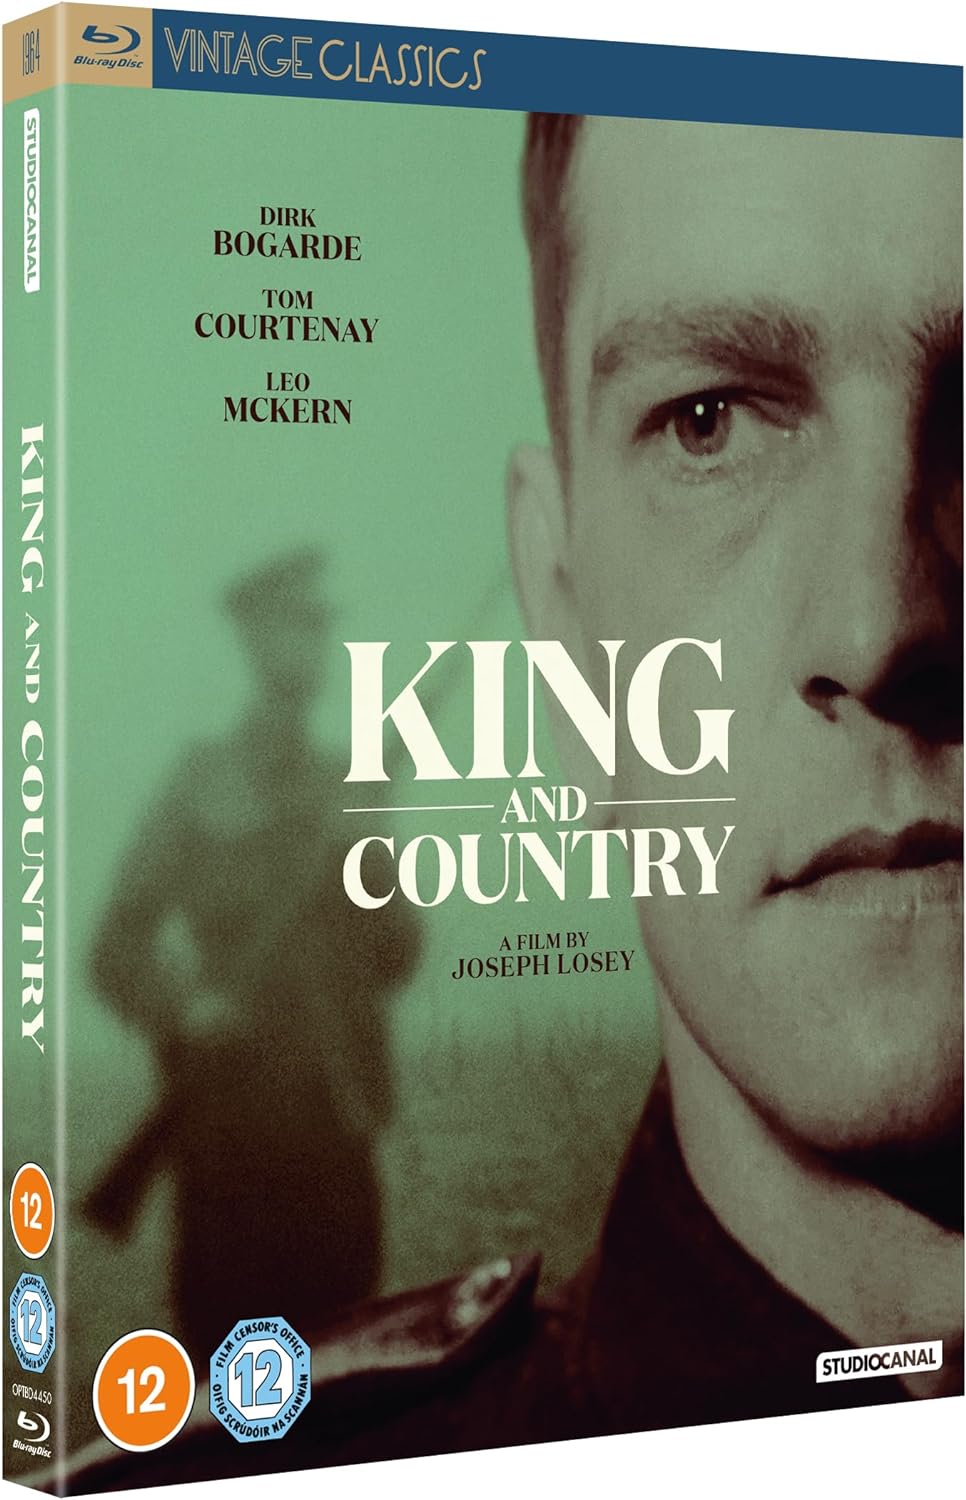 King and Country Blu-ray with Slipcover (StudioCanal/Region B)